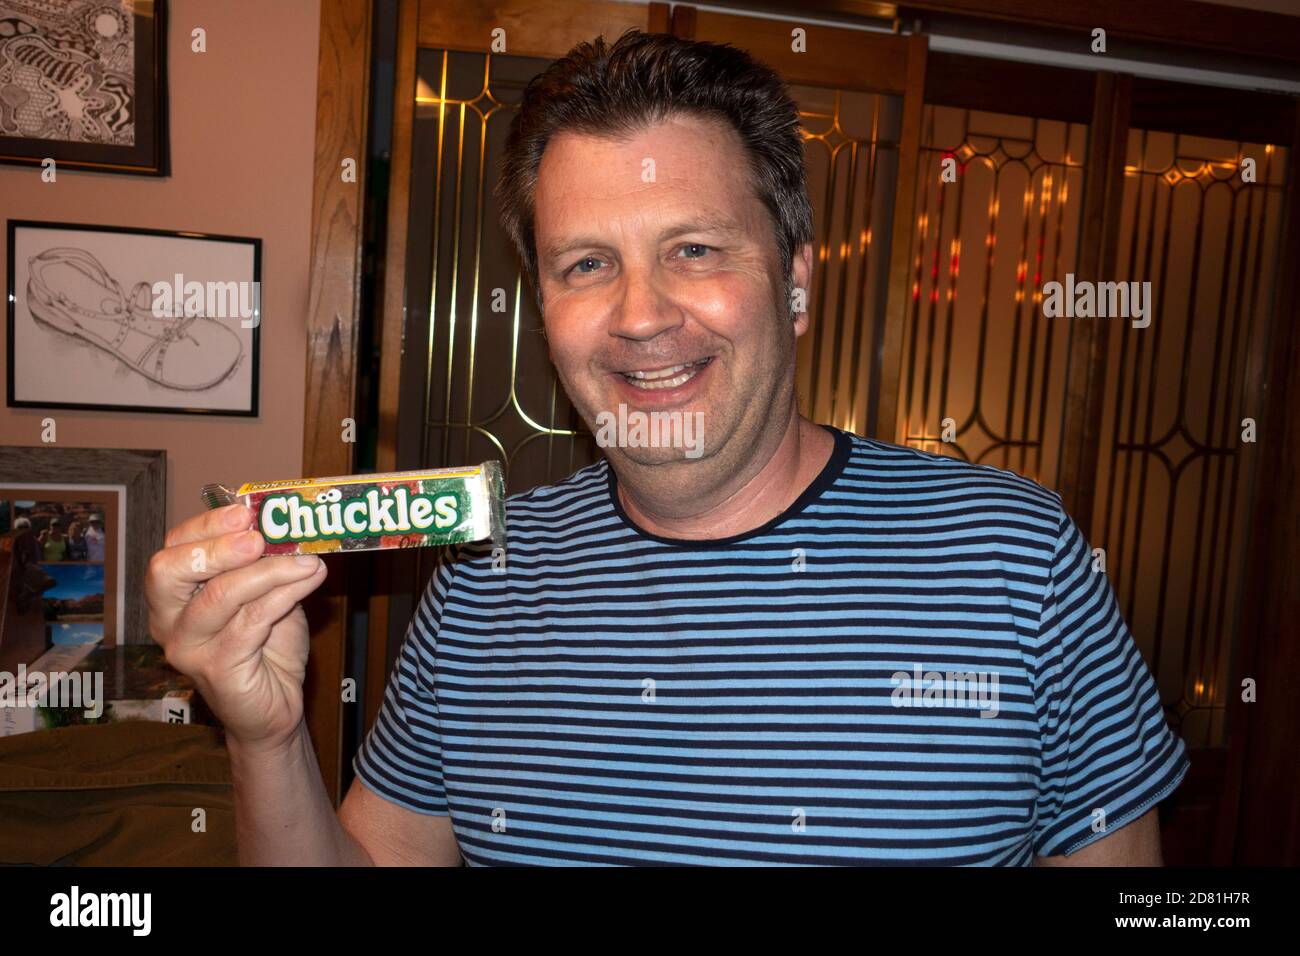 Thrilled man ready to enjoy an old time favorite Chuckles candy chuckling. Downers Grove Illinois IL USA Stock Photo